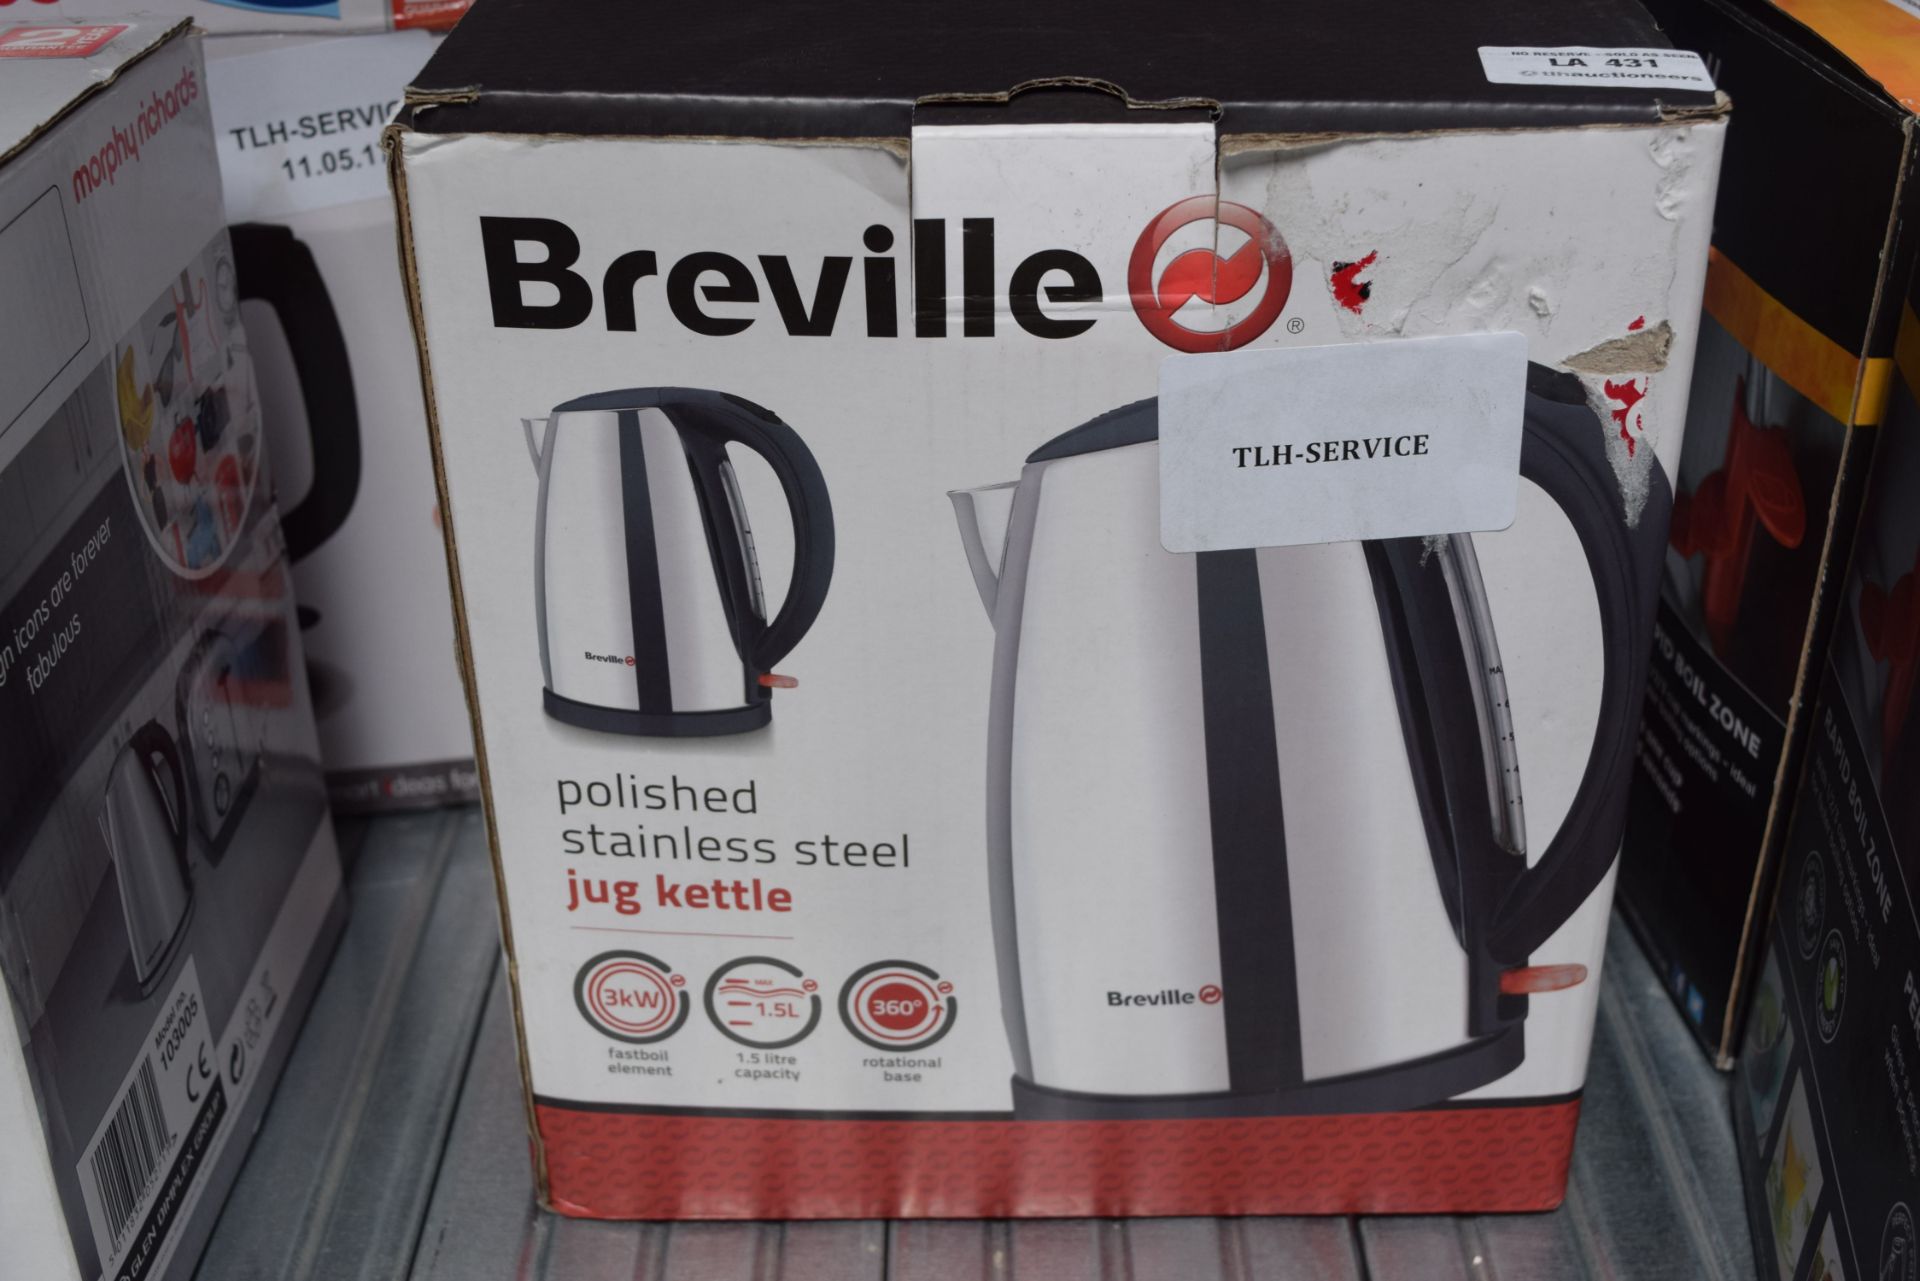 1 X BREVILLE POLISHED STAINLESS STEEL JUG KETTLE RRP £35 11.05.2017